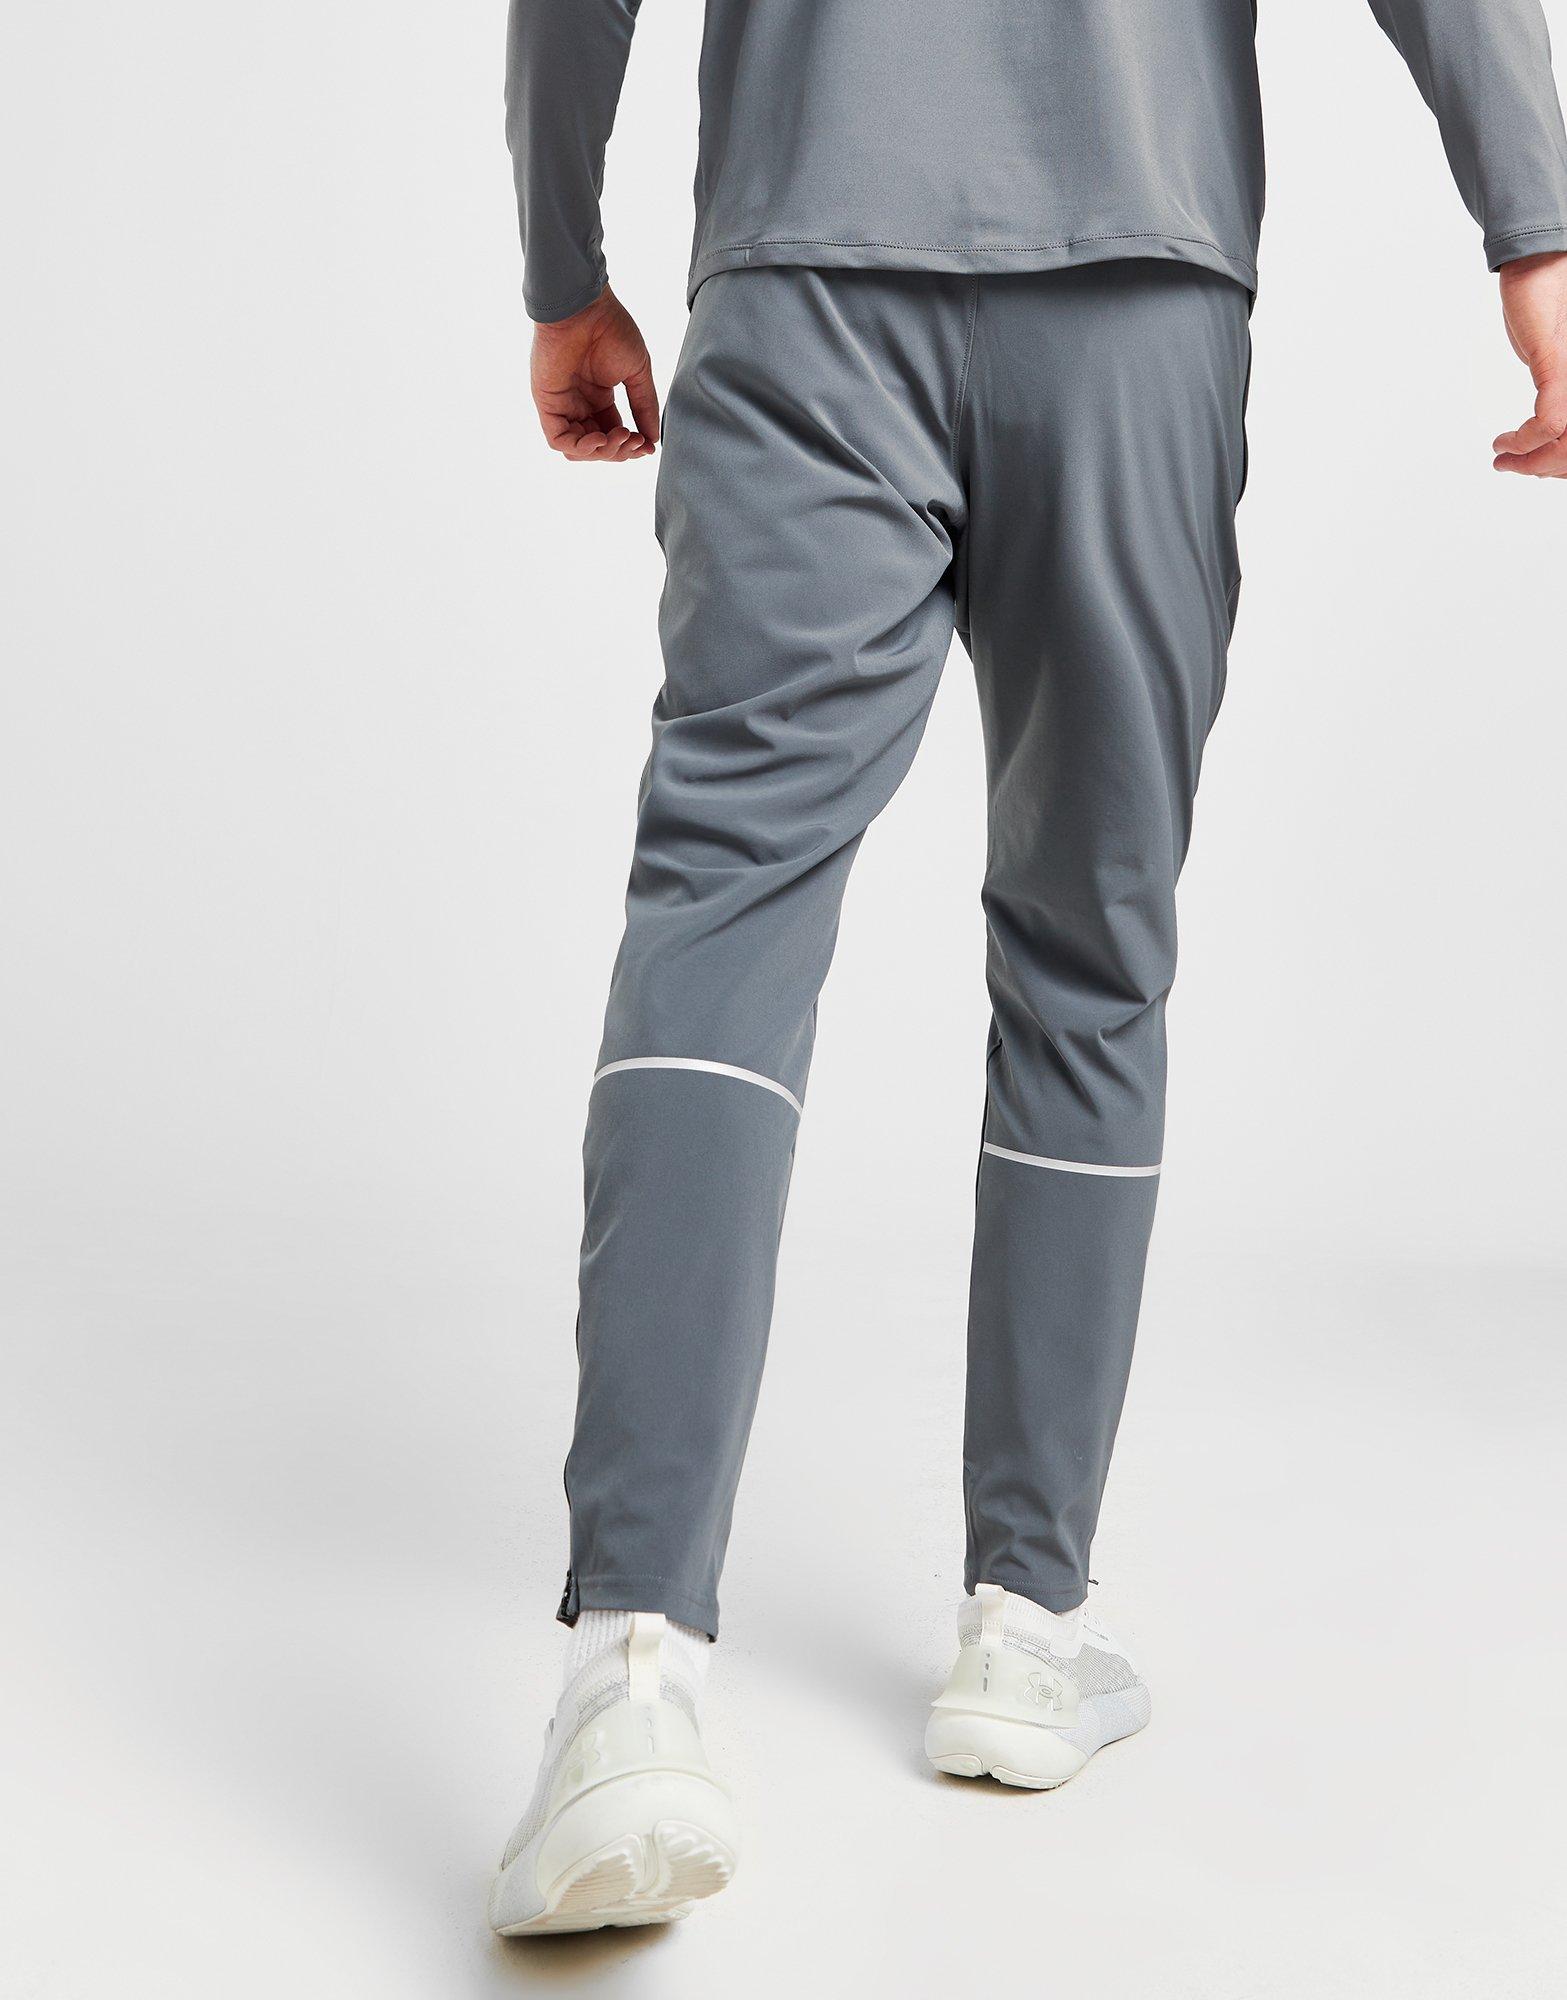 Iron Hyde Aygir Men's Sports Track Pants (Light Grey) exclusive at